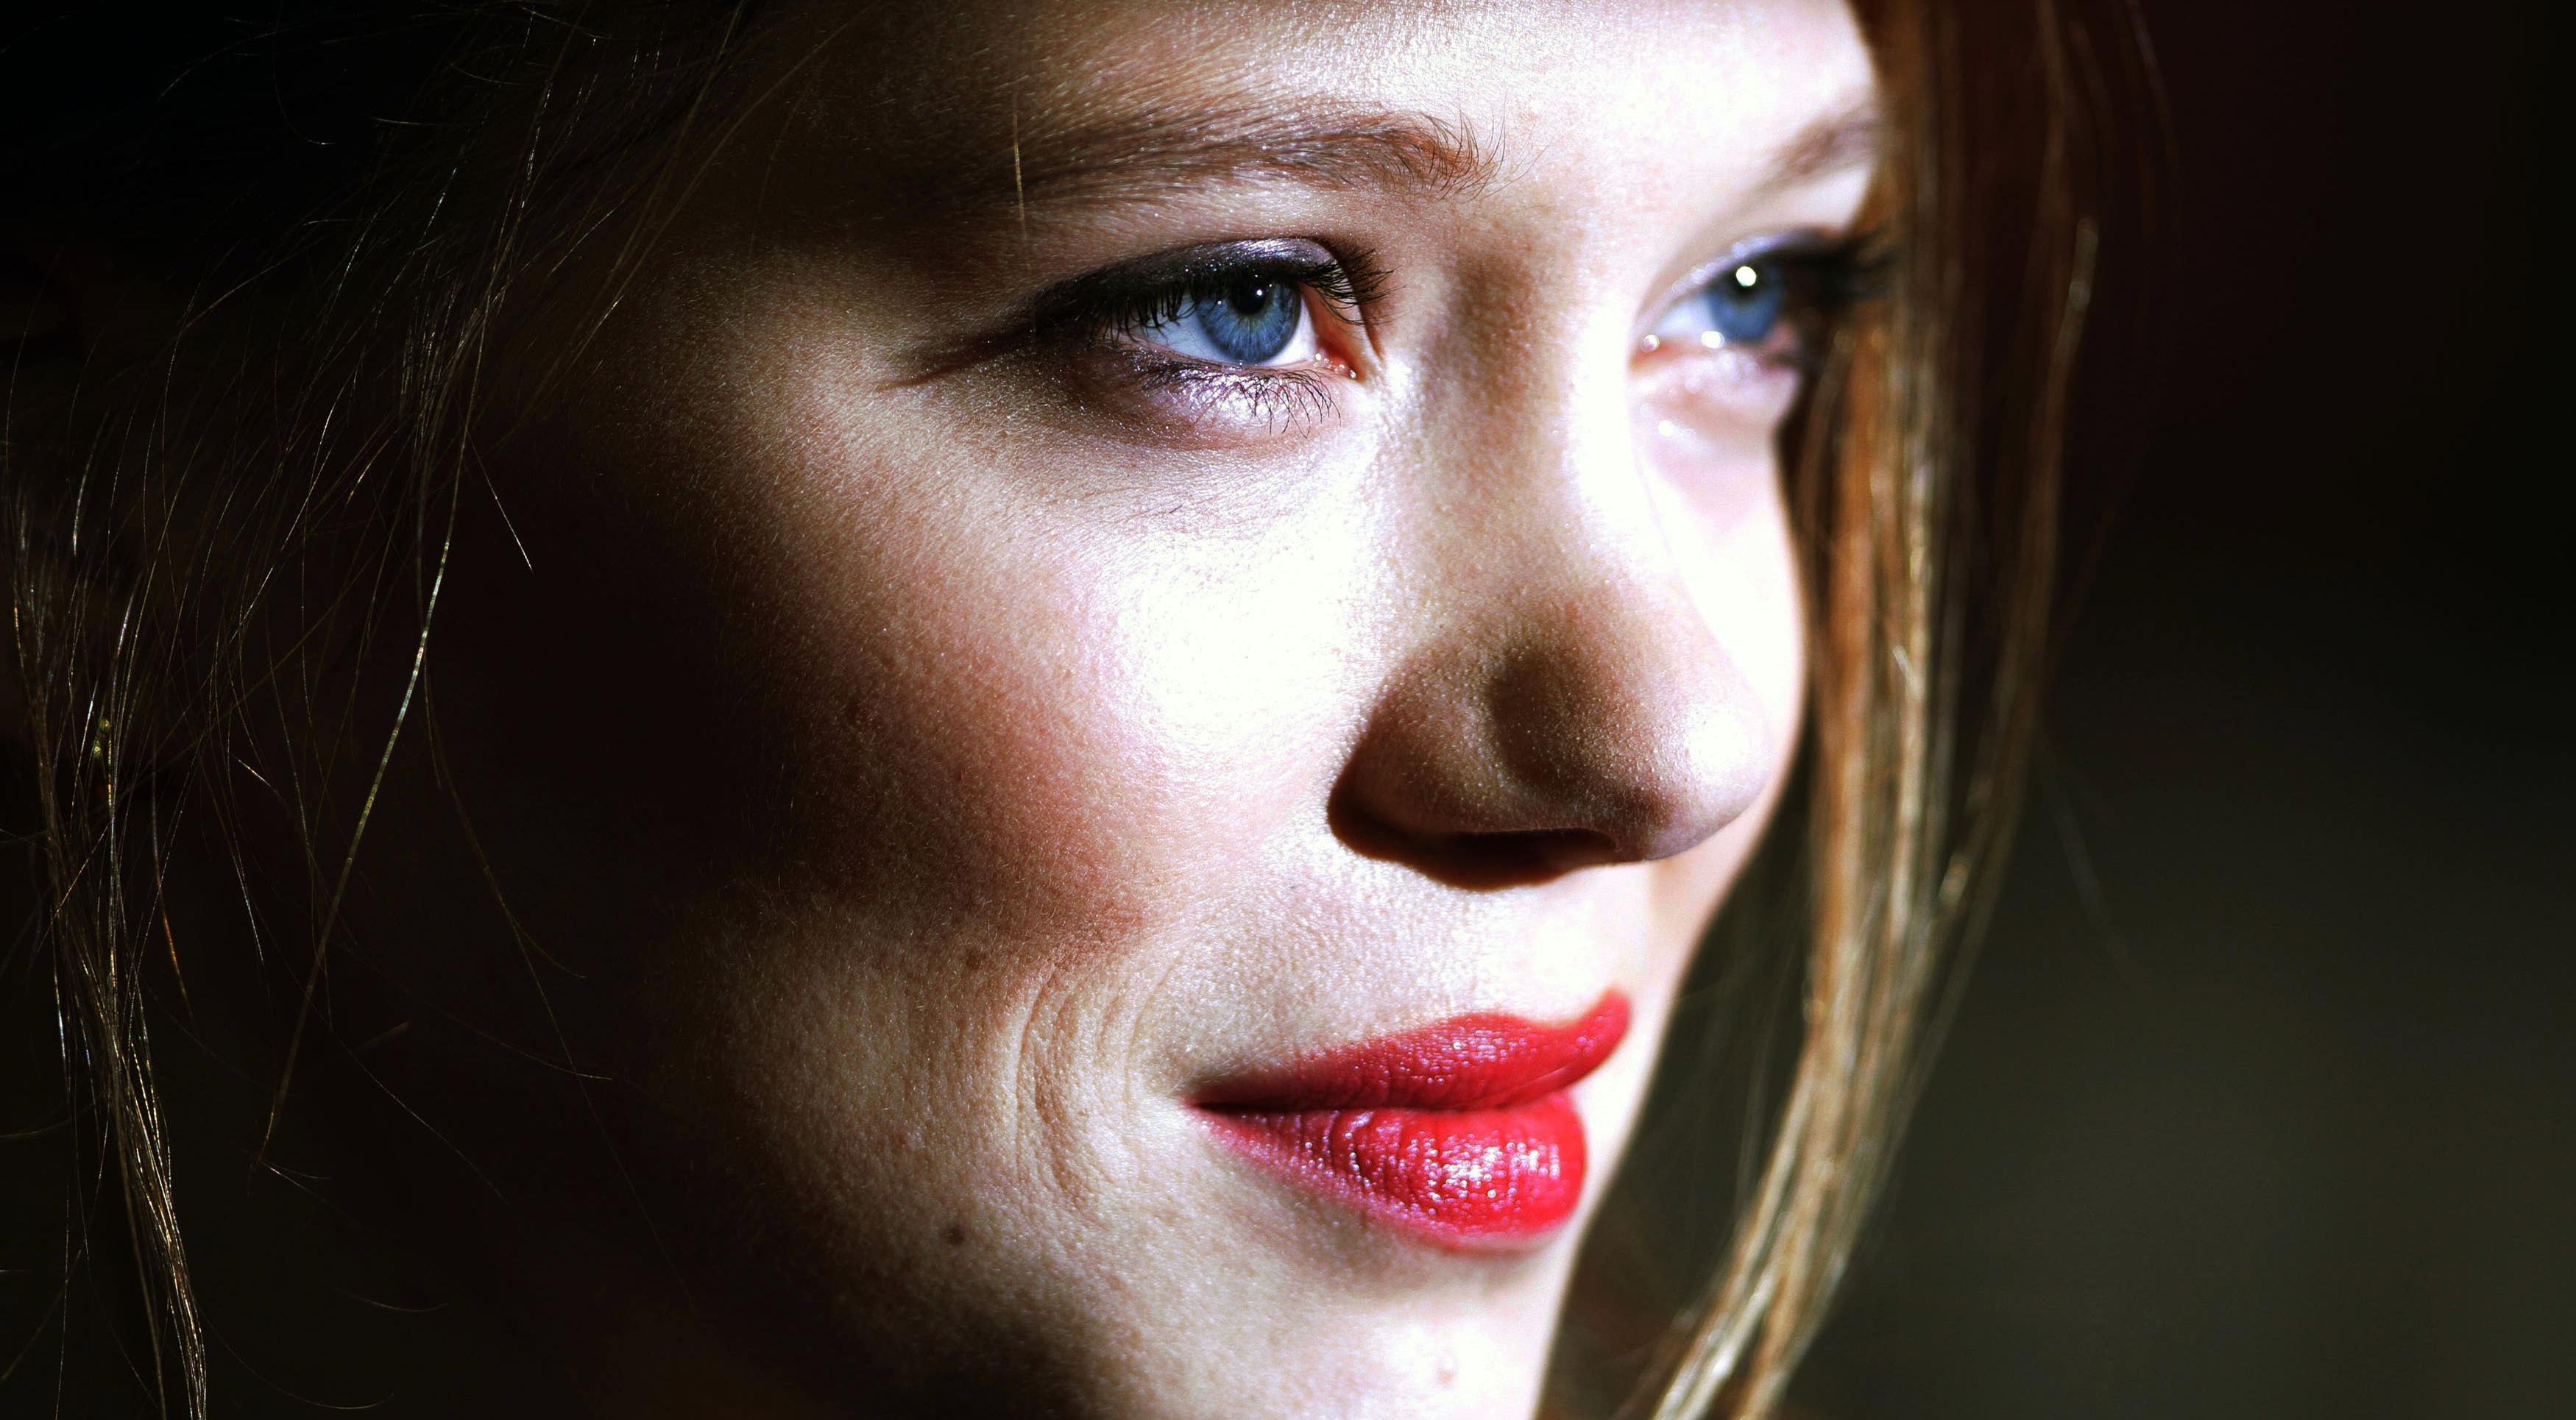 Lea Seydoux: I did not know about French Dispatch nudity when offered role